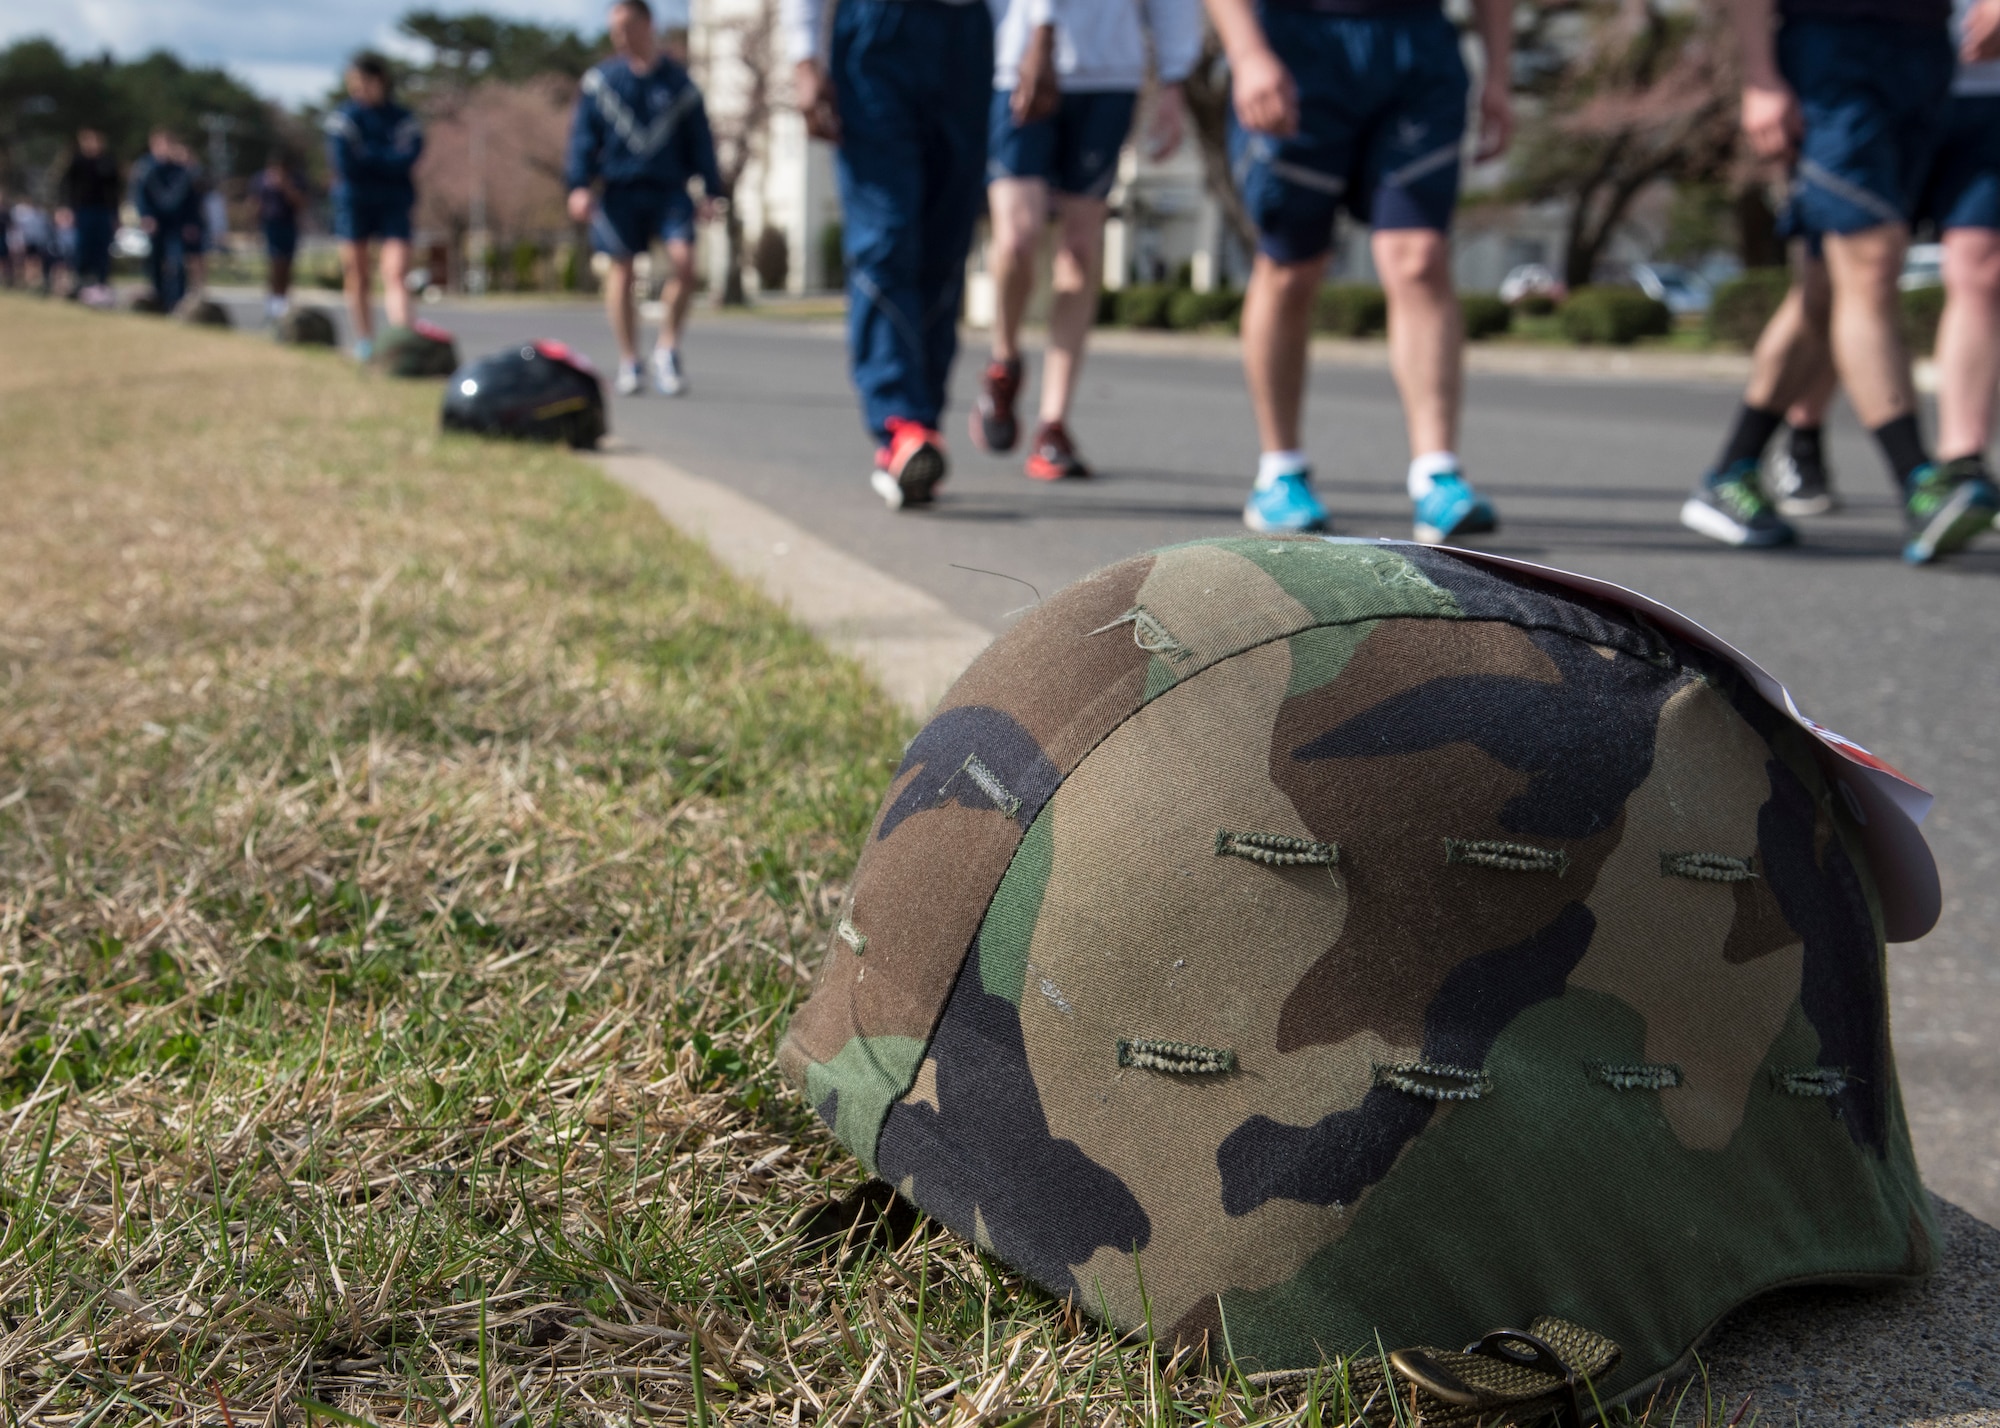 Military helmets line Risner Circle during Resilient Airman Day at Misawa Air Base, Japan, April 15, 2016. During the “Silent Walk” portion of the day, Misawa military members passed by helmets topped with red cards describing sexual assaults occurring during fiscal year 2015 and 2016. The purpose of this event was to highlight the necessity of caring for one’s wingman and bring the severity of the issue home. (U.S. Air Force photo by Airman 1st Class Jordyn Fetter)